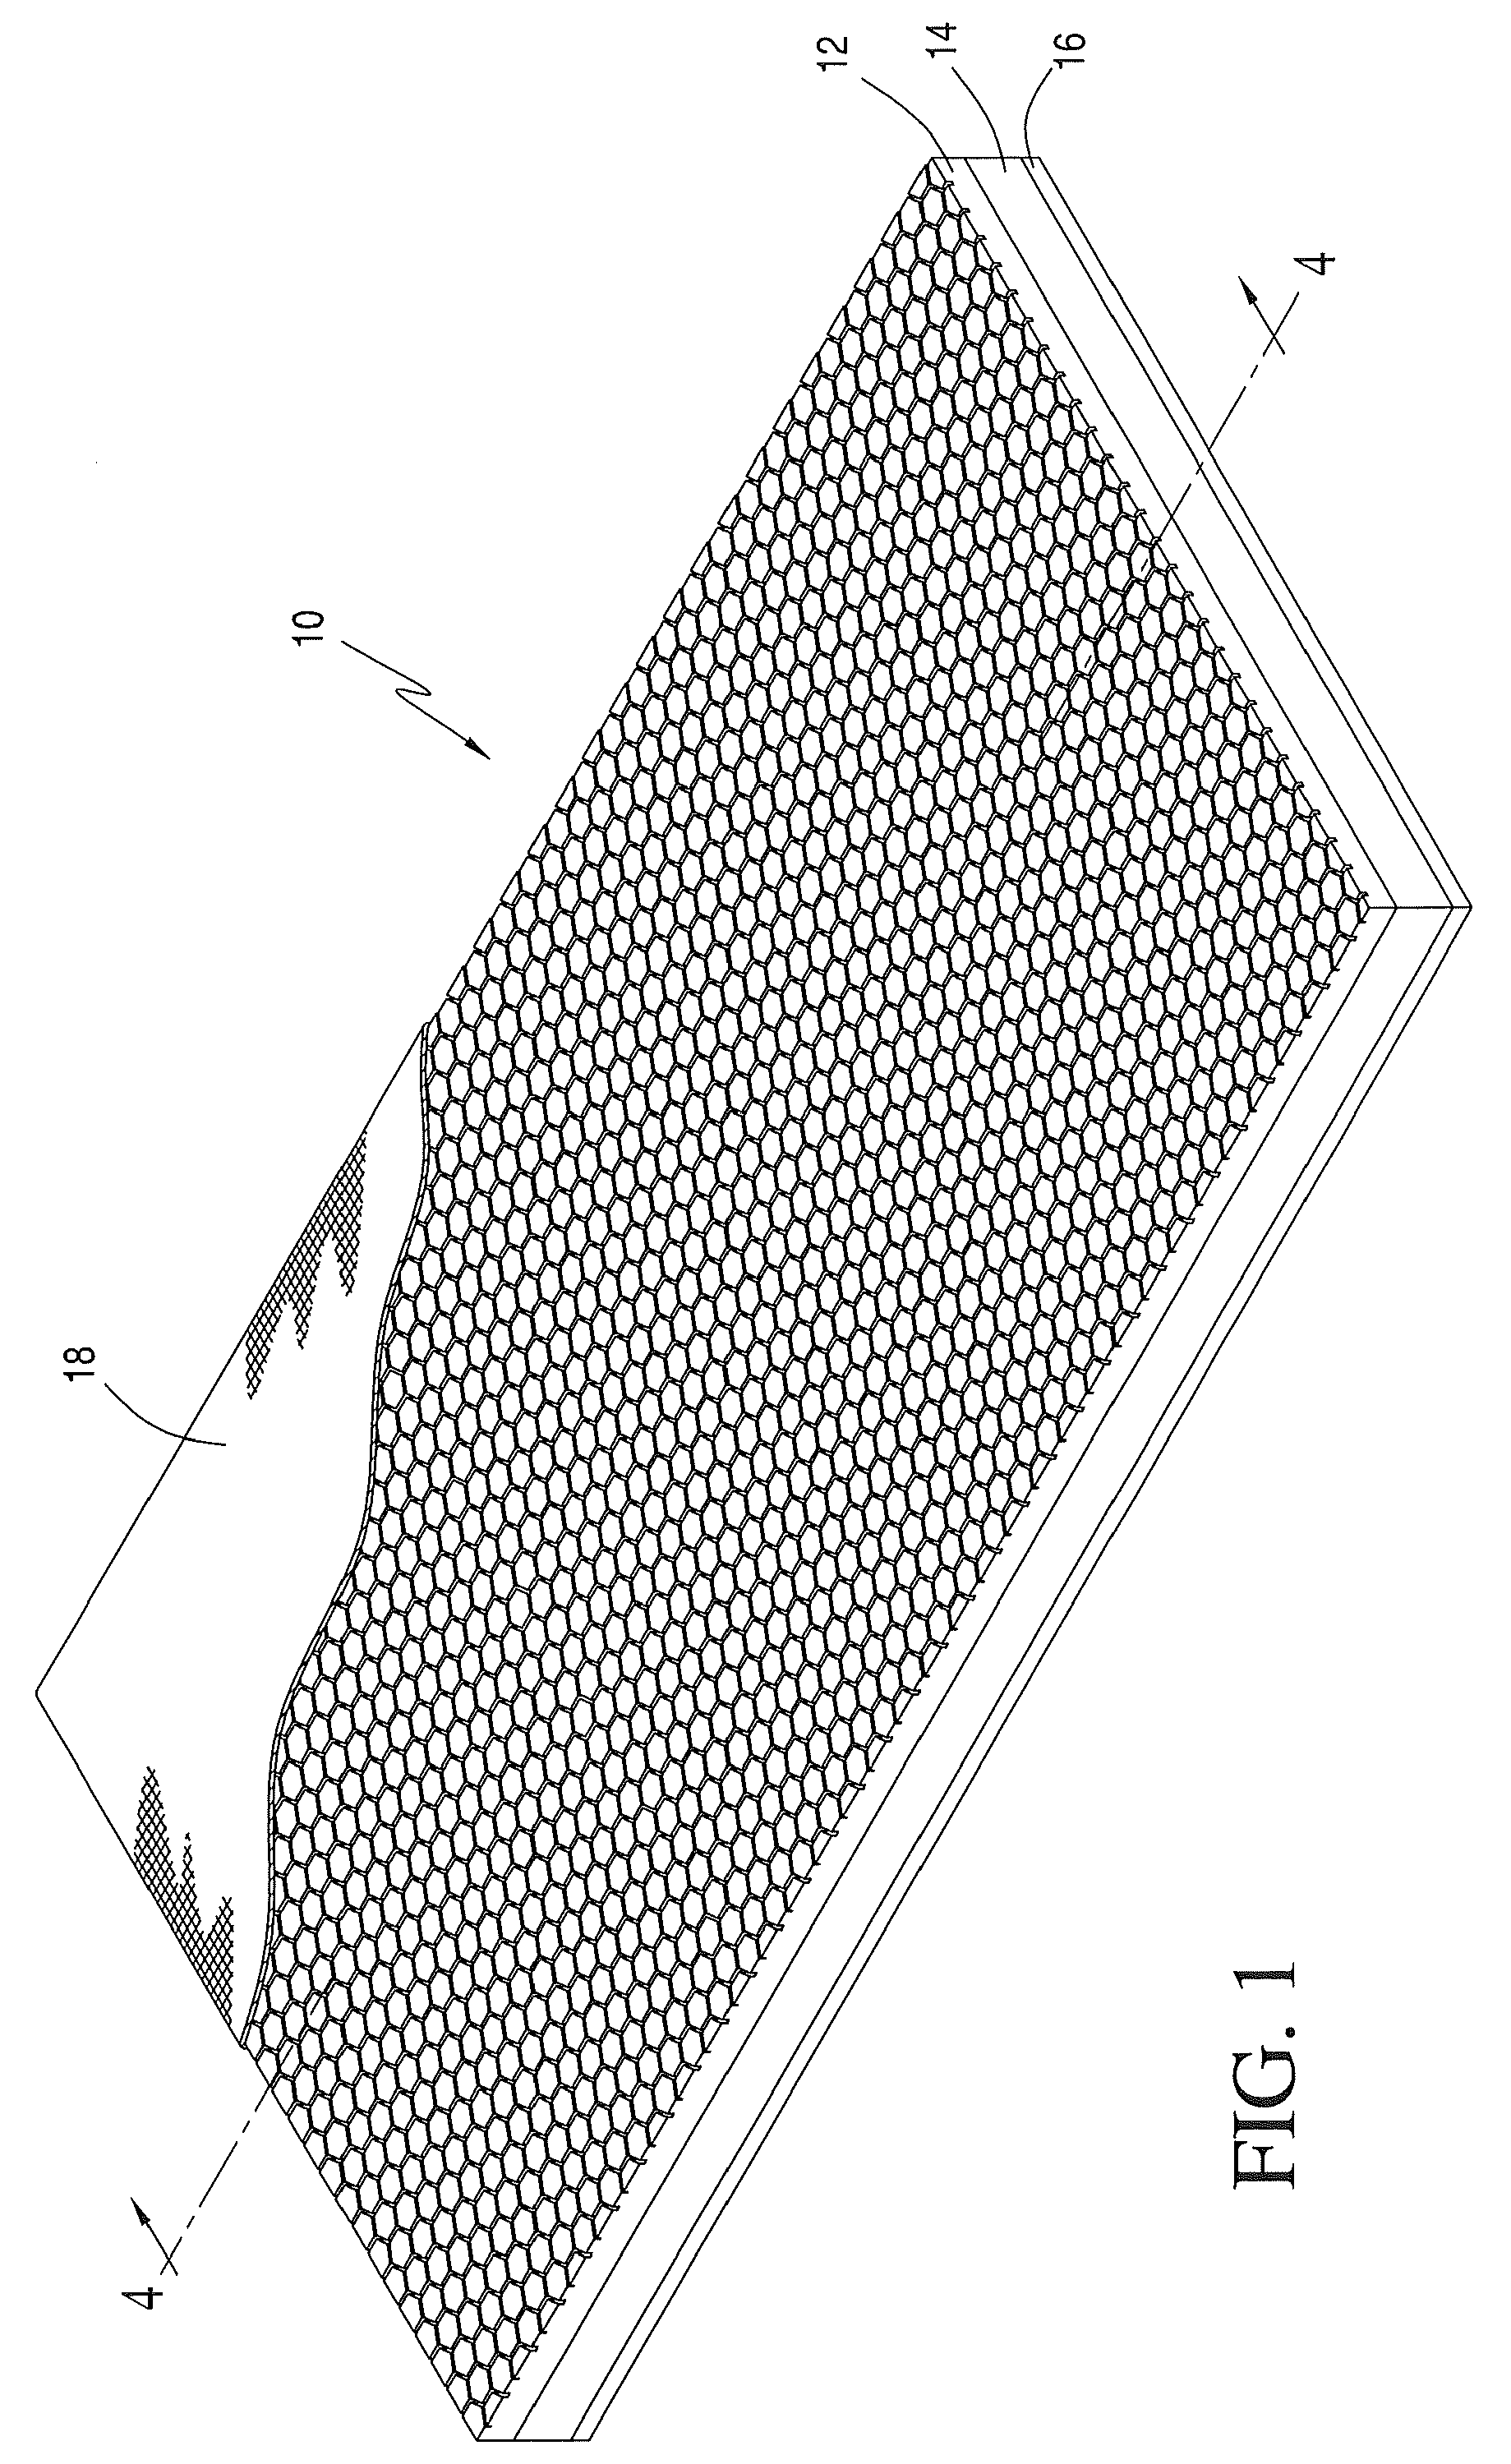 Mattress adapted for supporting heavy weight persons